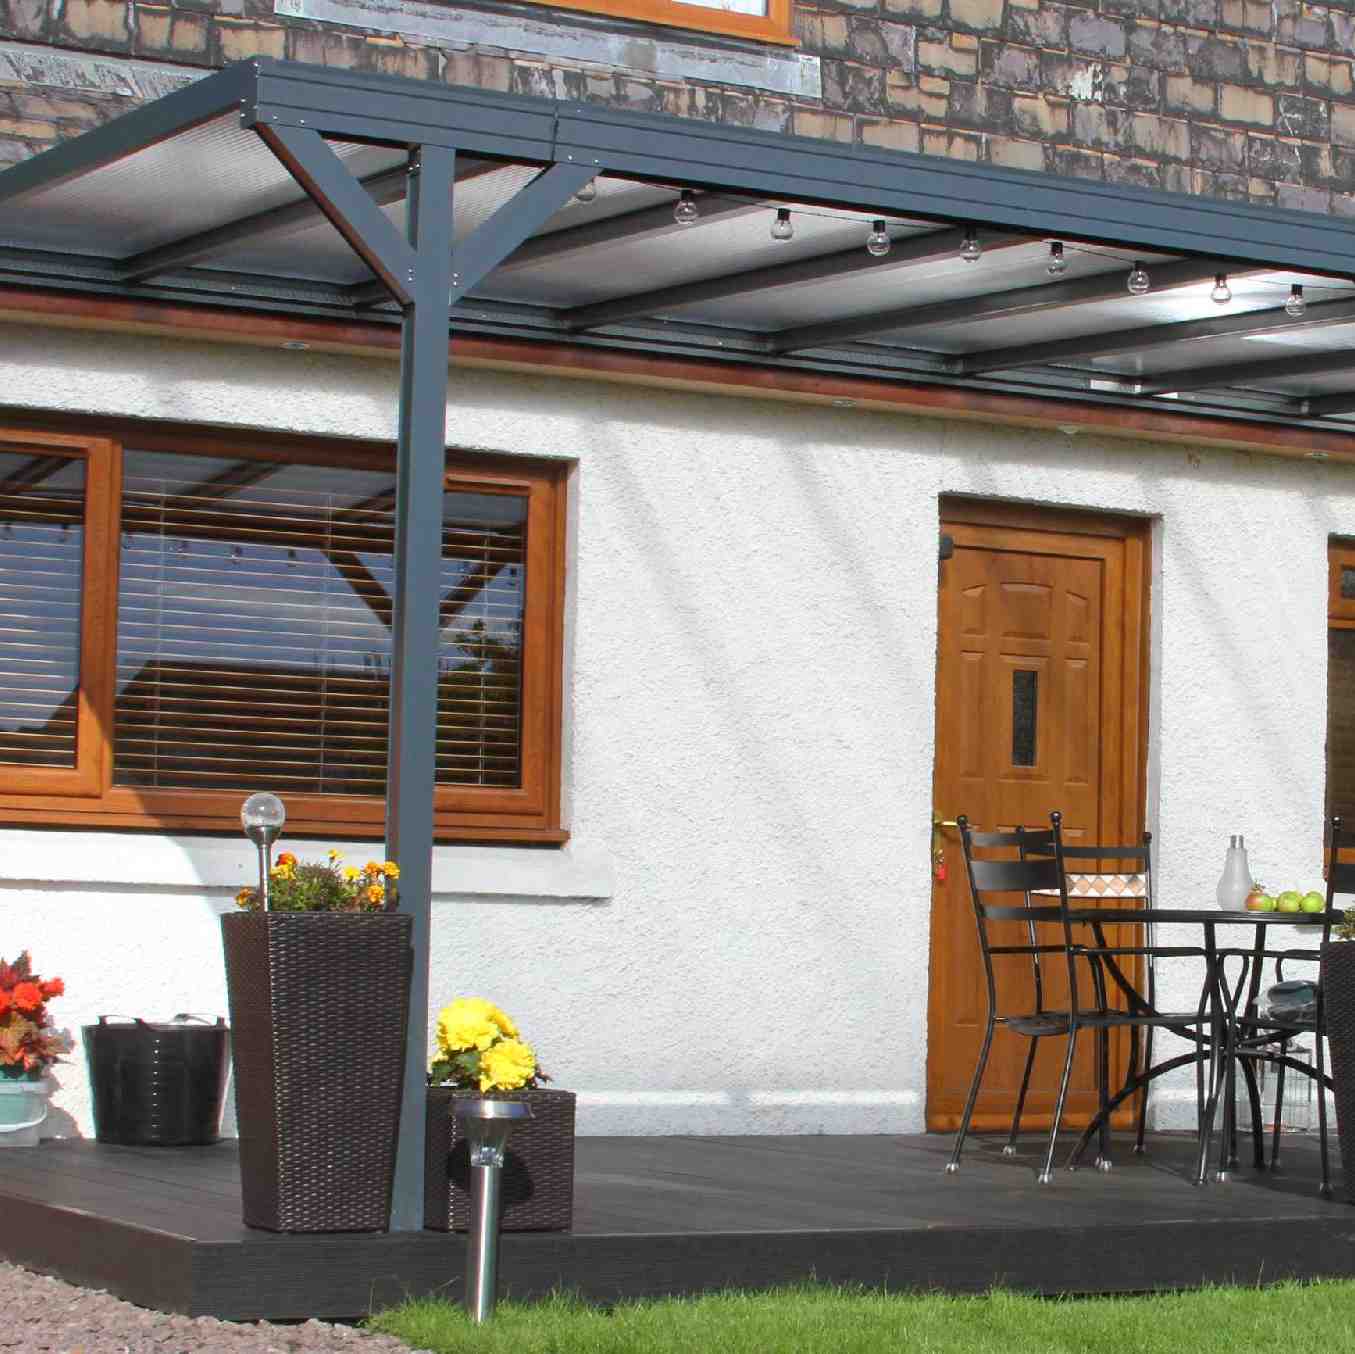 Omega Verandah, Anthracite Grey, 6mm Glass Clear Plate Polycarbonate Glazing - 9.0m (W) x 4.0m (P), (4) Supporting Posts